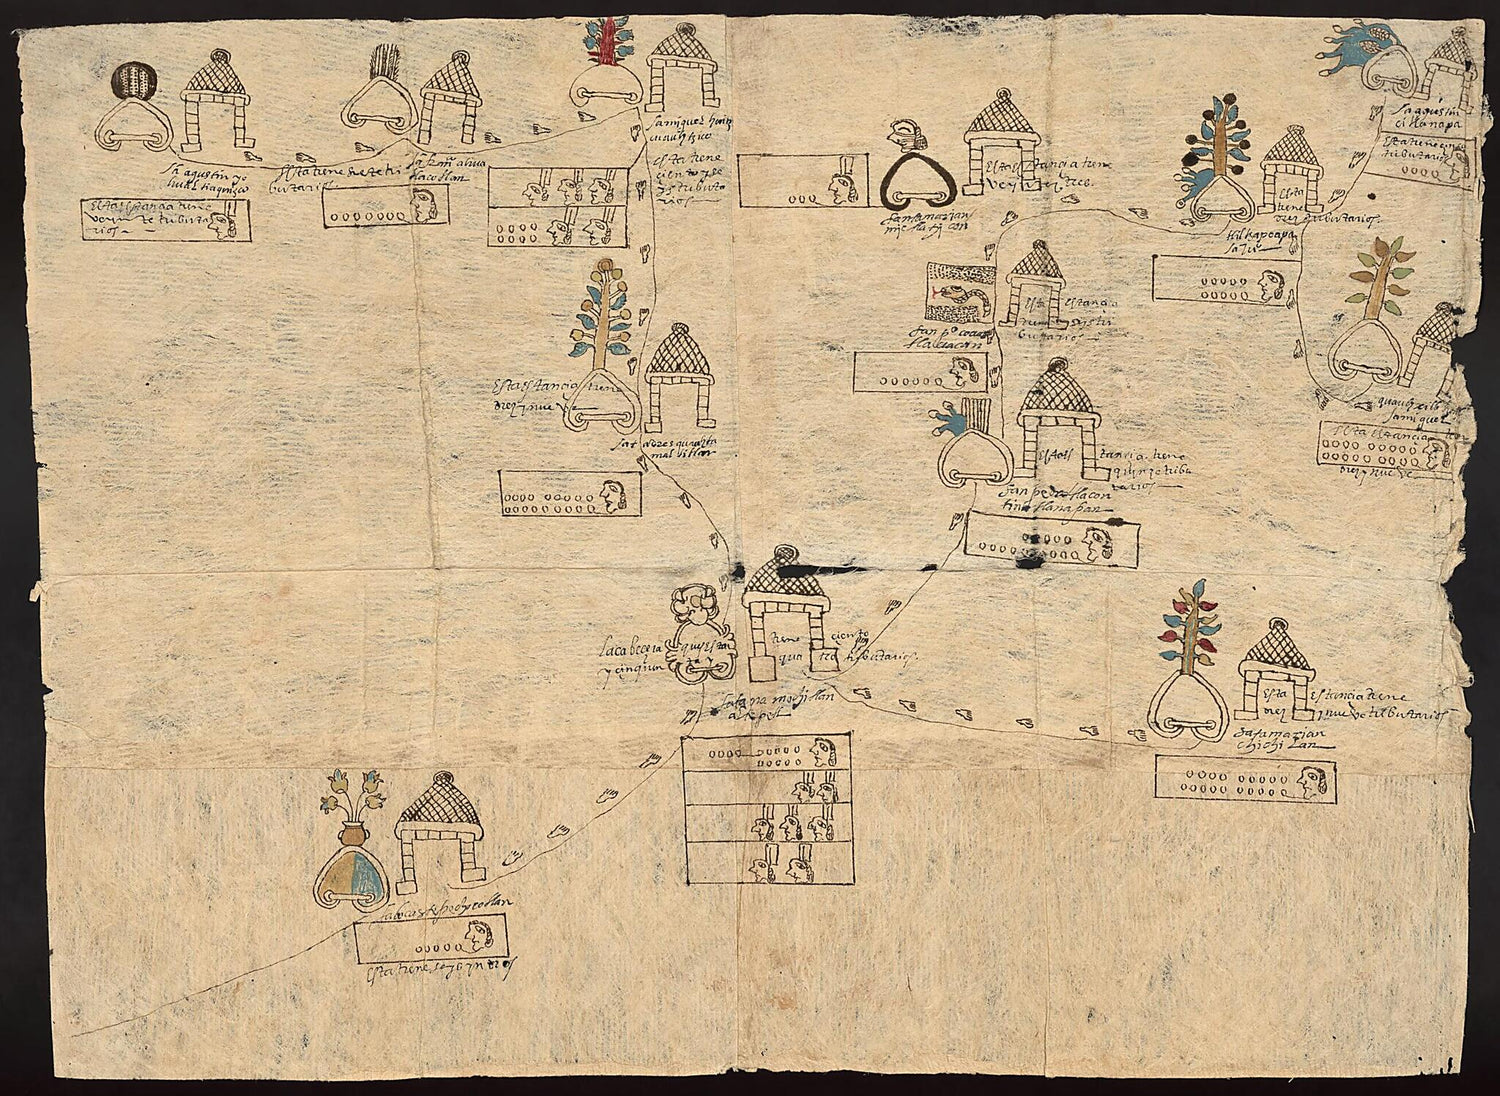 This old map of Muchitlan, Tlaxcala, Mexico from 1582 was created by  in 1582